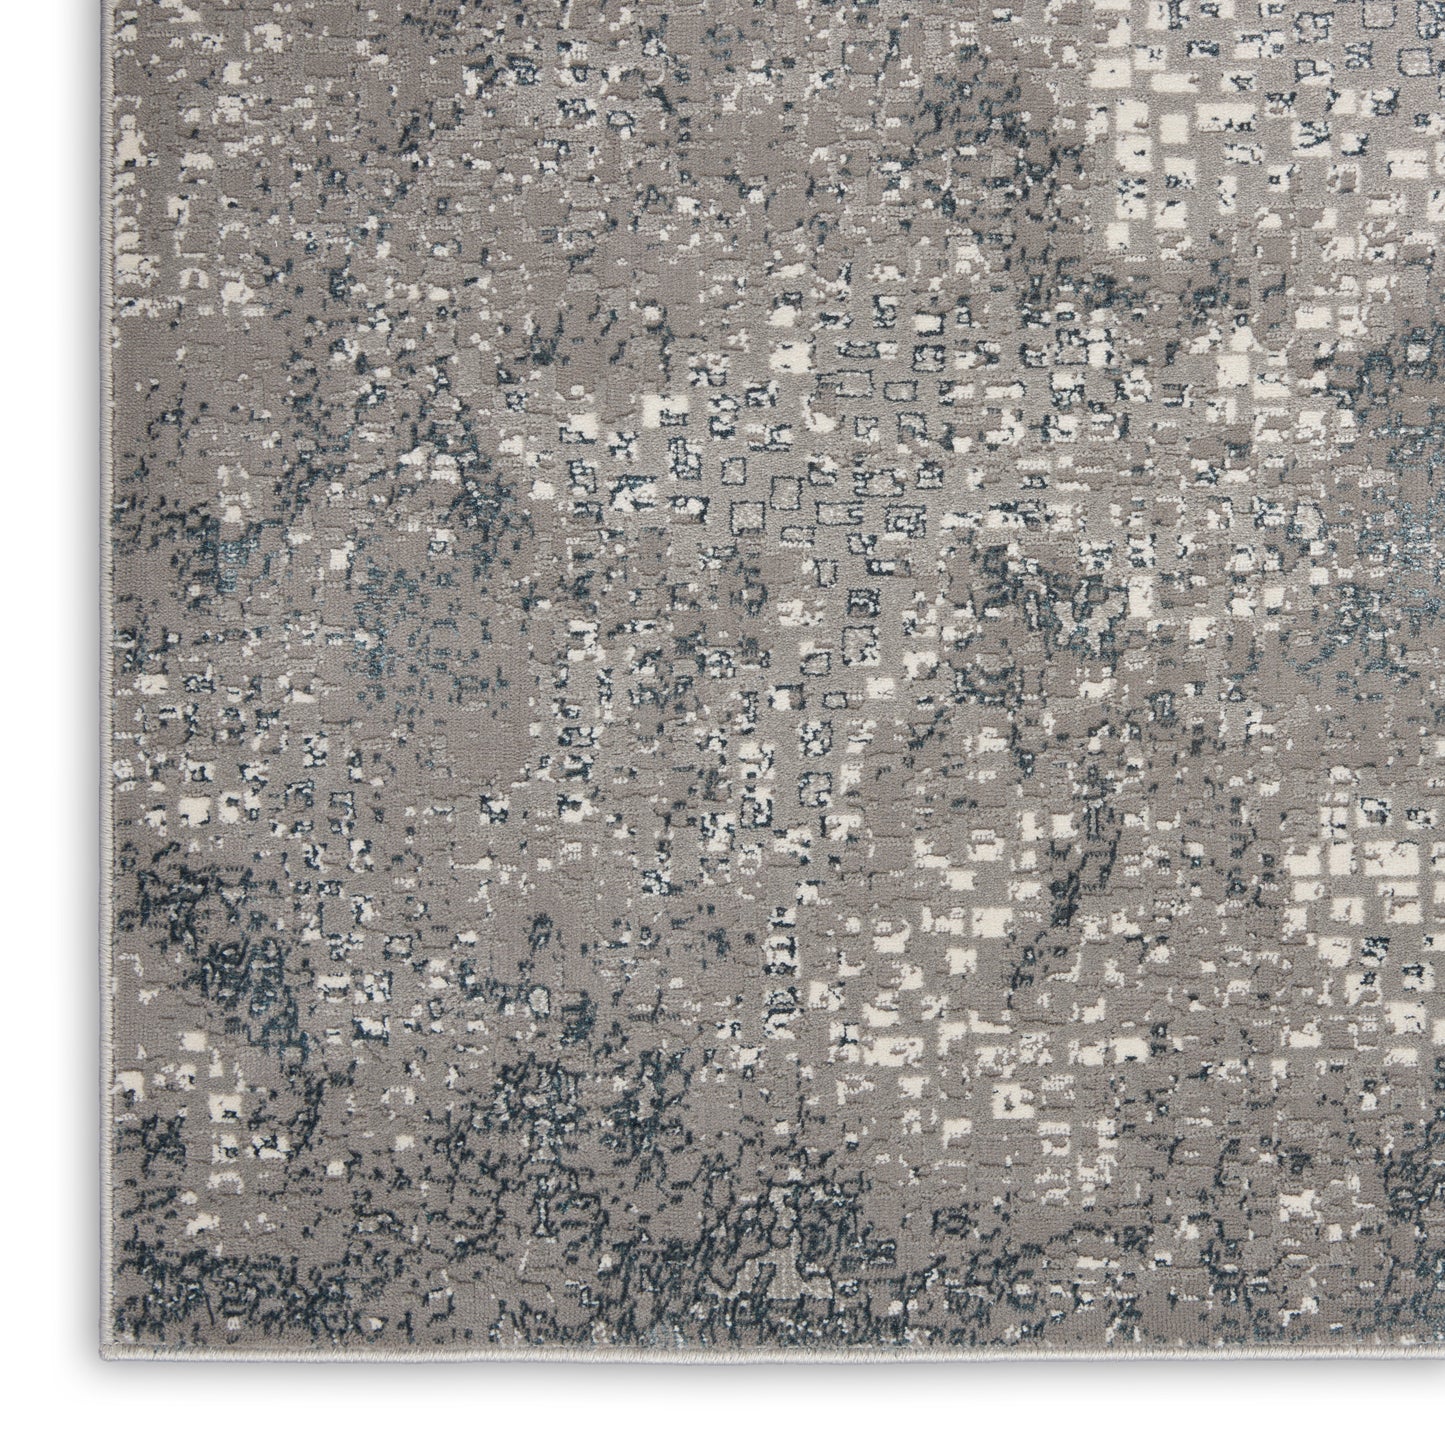 Michael Amini MA90 Uptown UPT02 Grey  Contemporary Machinemade Rug